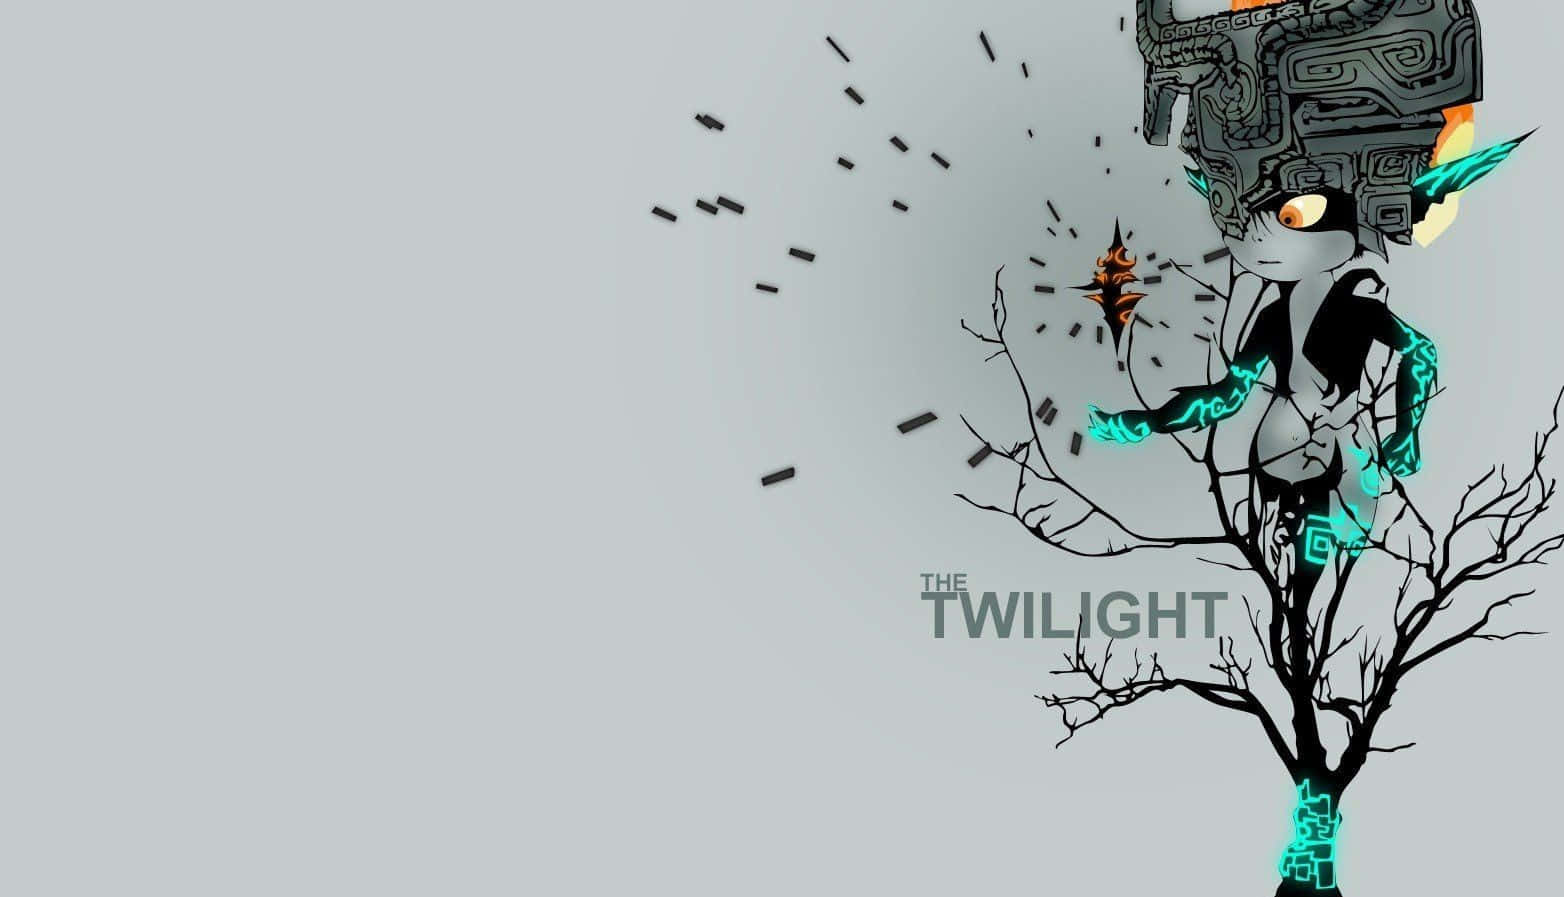 Midna, the Twilight Princess from The Legend of Zelda series, in an epic wallpaper Wallpaper